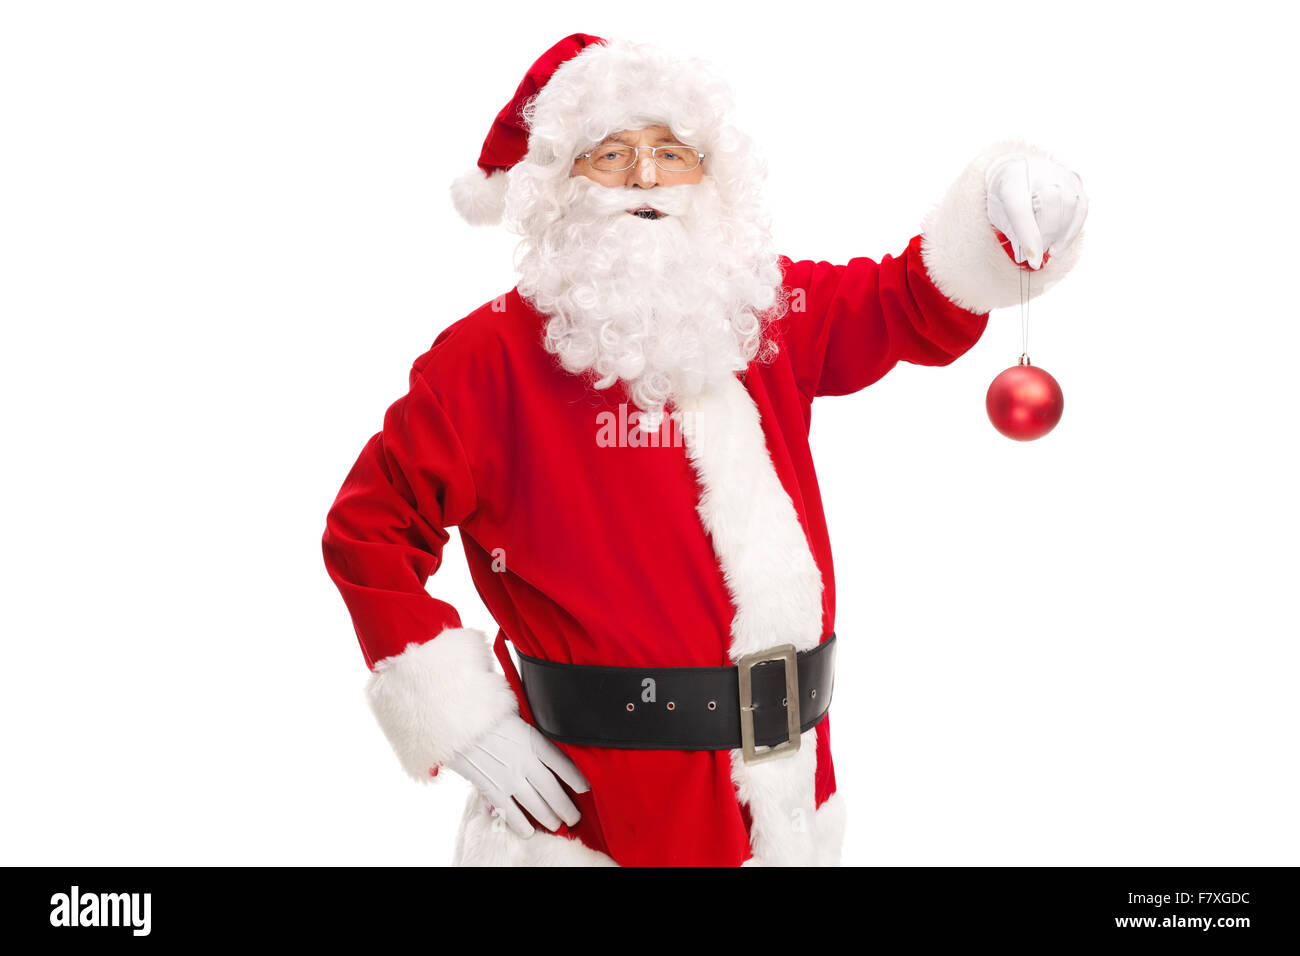 Studio shot of Santa Claus holding a red Christmas ball and looking at the camera isolated on white background Stock Photo